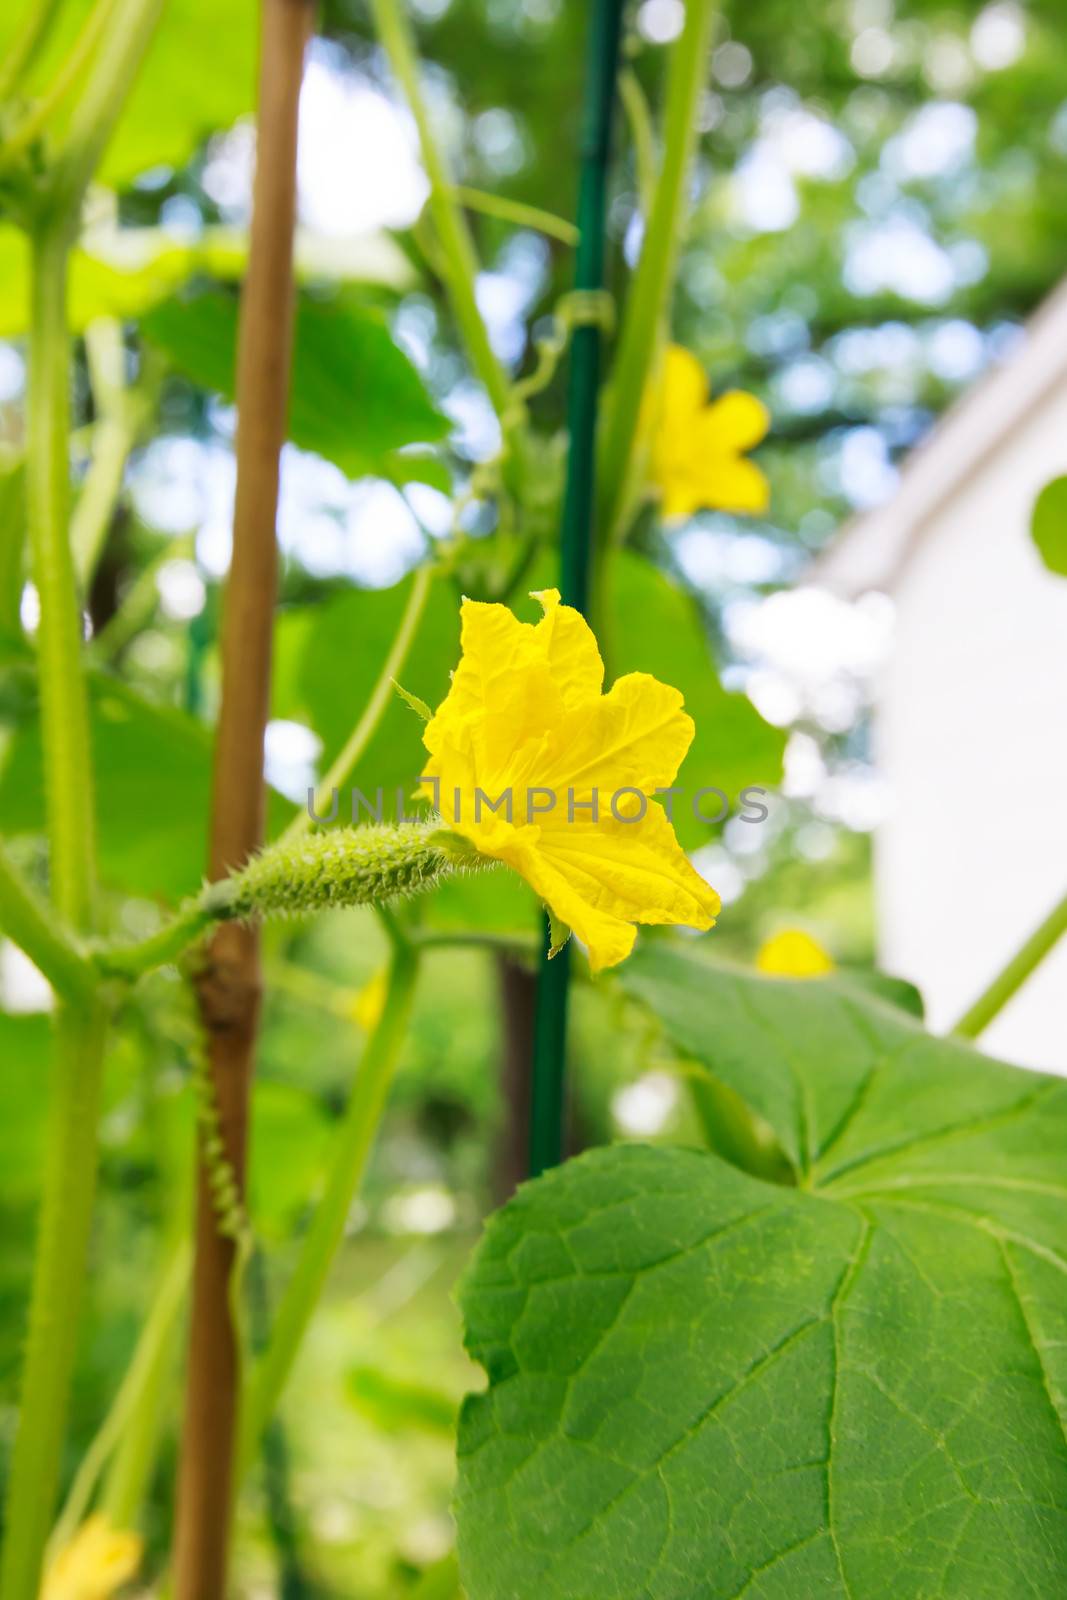 Young cucumber with flowers in a garden by a house